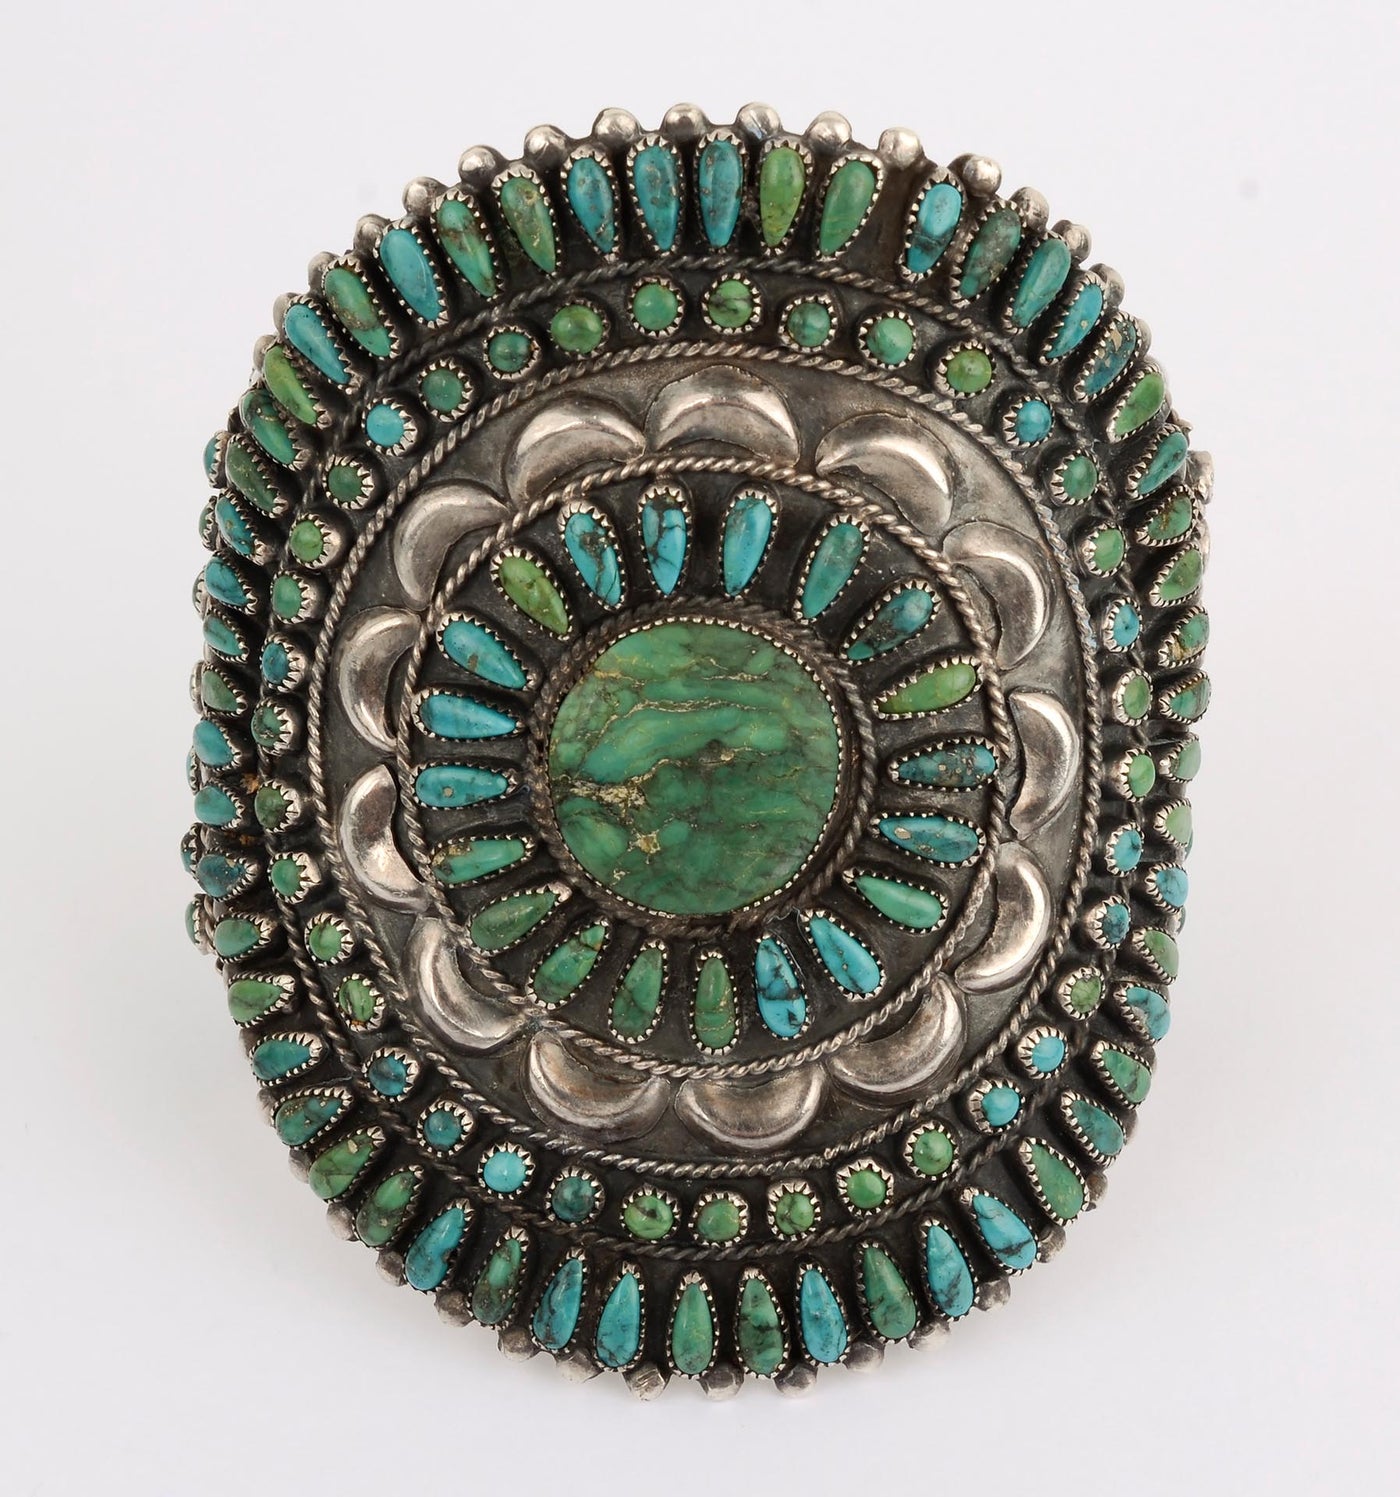 zuni-pot-point-turquoise-cuff-bracelet-1382679-front-of-product